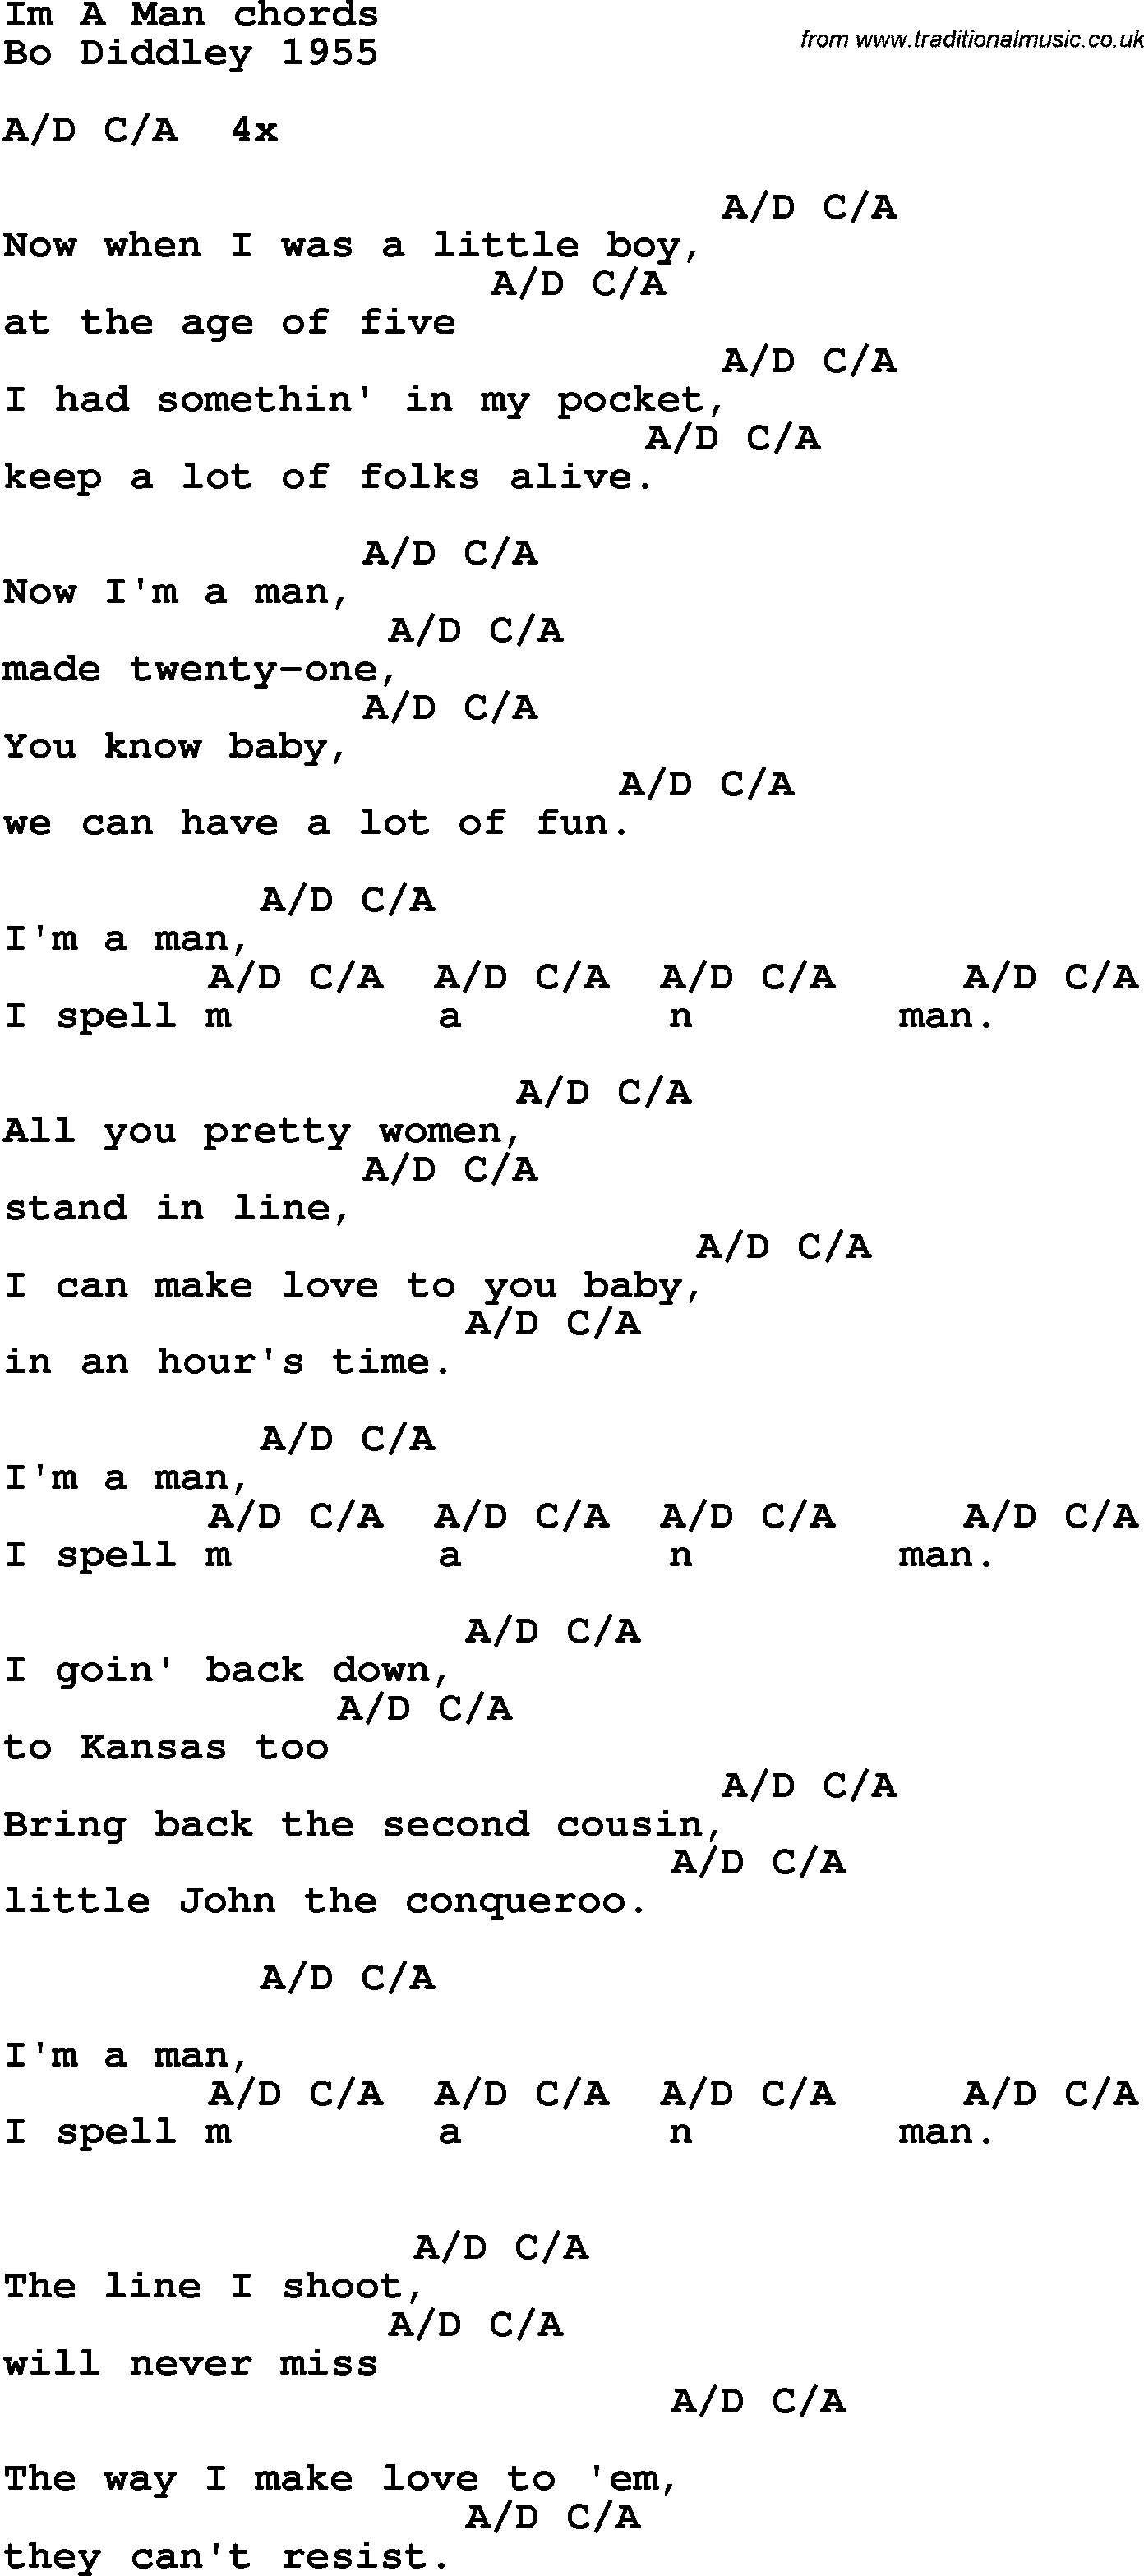 Song Lyrics with guitar chords for I'm A Man - Bo Diddley 1955